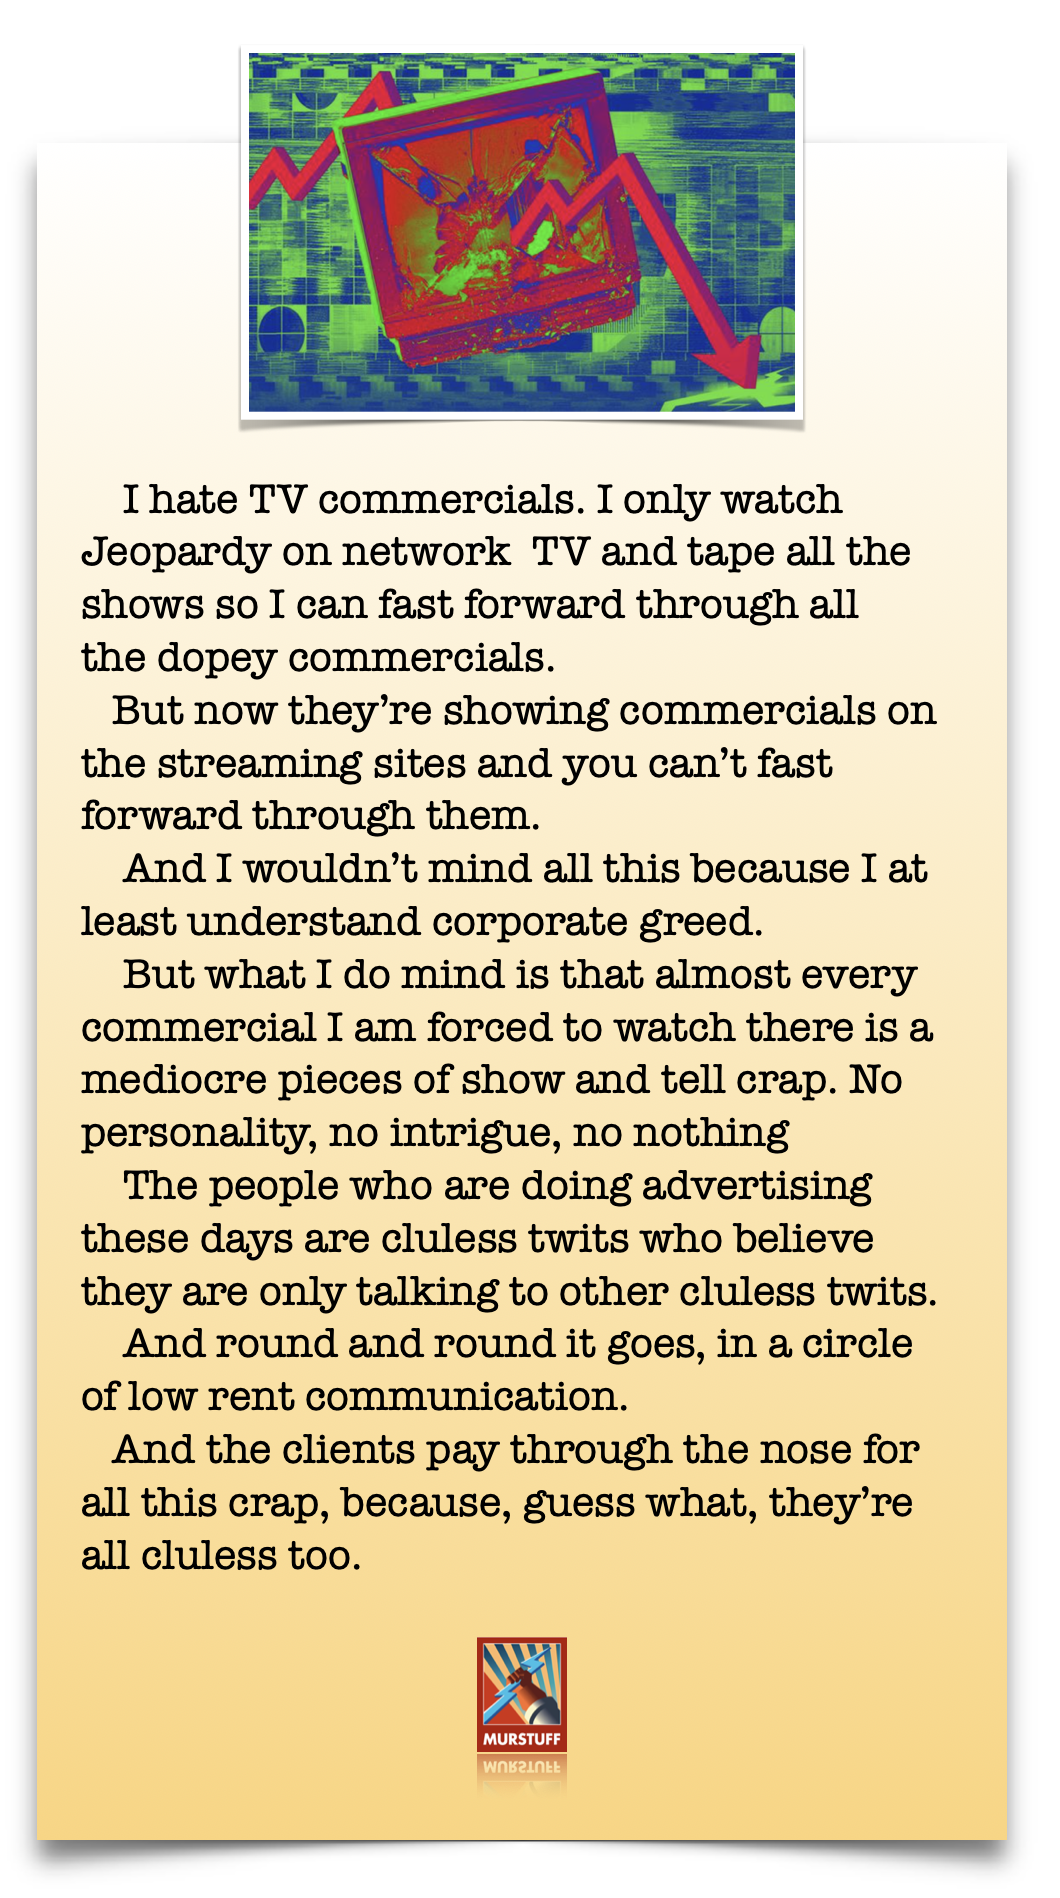 I hate TV commercials. I only watch
Jeopardy on network TV and tape all the
shows so I can fast forward through all
the dopey commercials.

But now they're showing commercials on
the streaming sites and you can’t fast
forward through them.

And I wouldn't mind all this because I at
least understand corporate greed.

But what I do mind is that almost every
commercial I am forced to watch there is a
mediocre pieces of show and tell crap. No
personality, no intrigue, no nothing

The people who are doing advertising
these days are cluless twits who believe
they are only talking to other cluless twits.

And round and round it goes, in a circle
of low rent communication.

And the clients pay through the nose for
all this crap, because, guess what, they're
all cluless too.

(
MURSTUFF